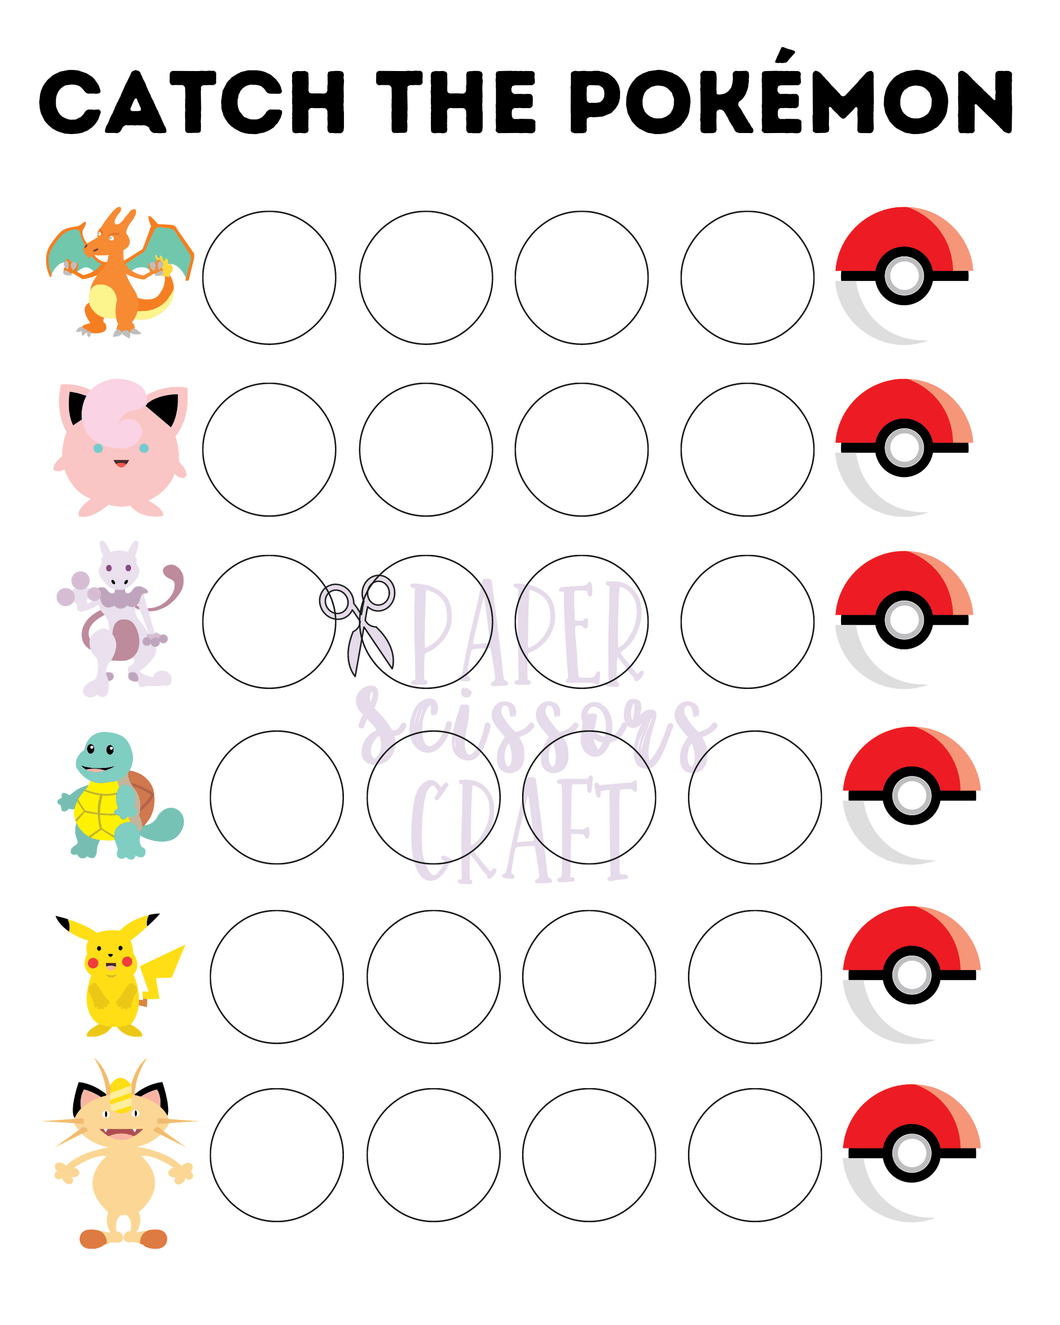 Pokémon Chore Chart or Potty Training Chart for Toddlers and Kids